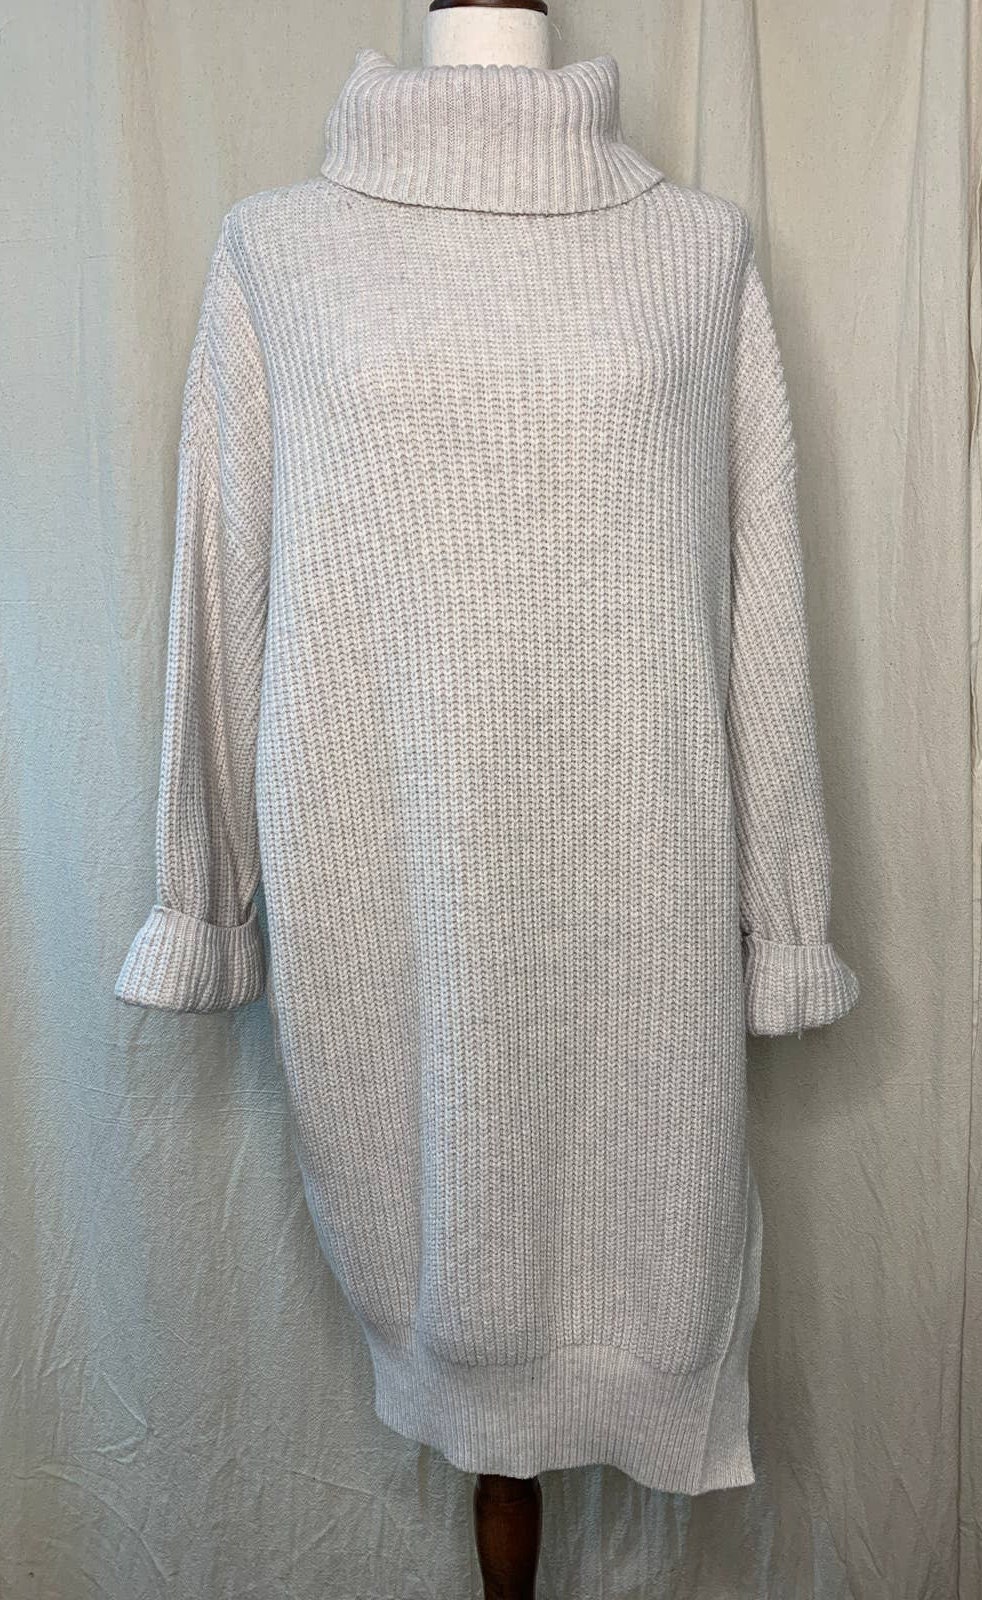 Anthropologie Sweater -  Canada